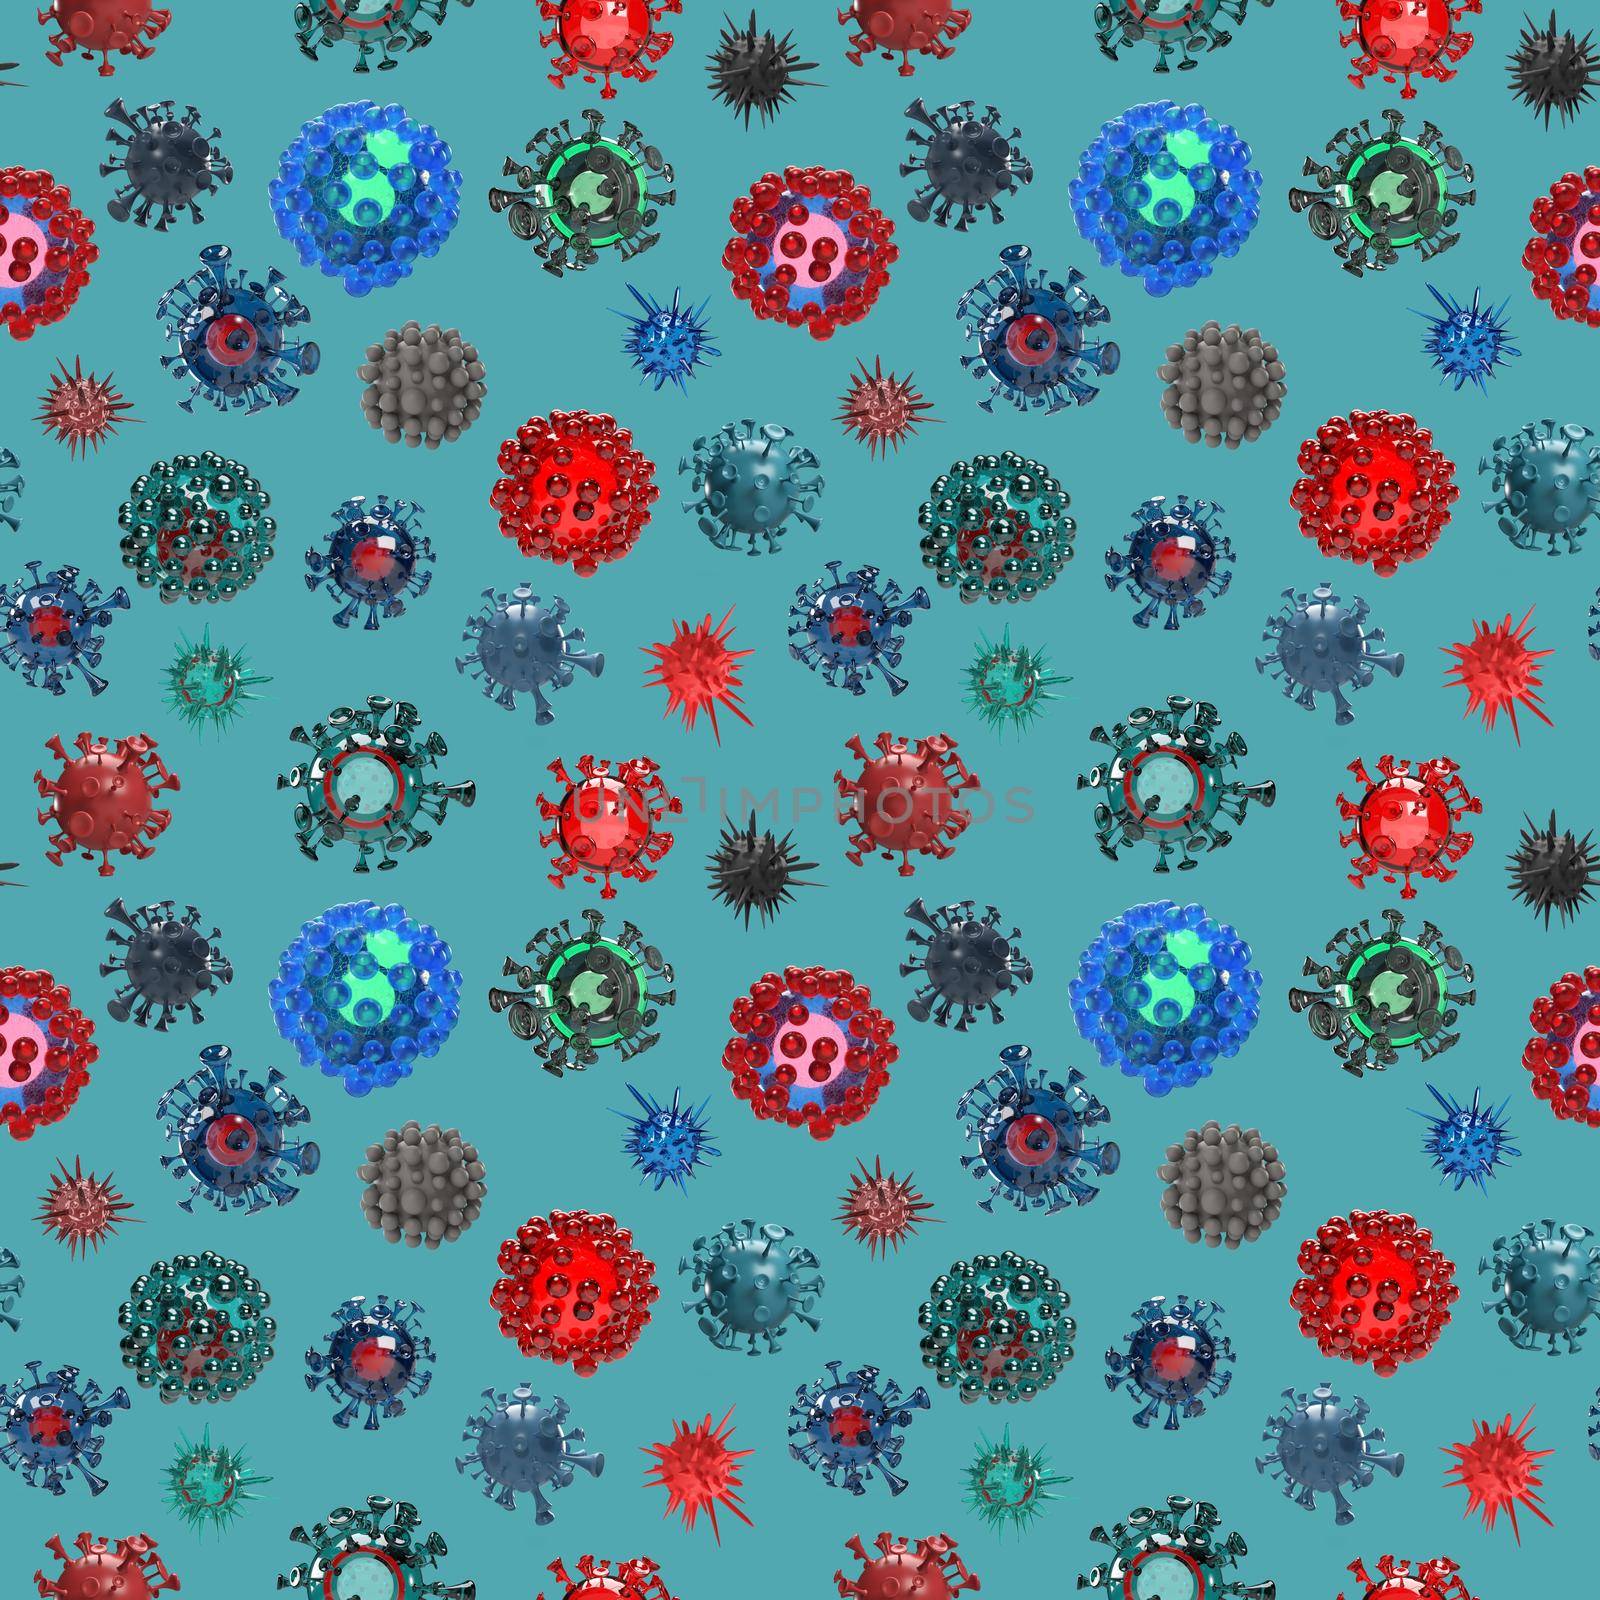 Virus cells seamless pattern on turquoise background by kisika